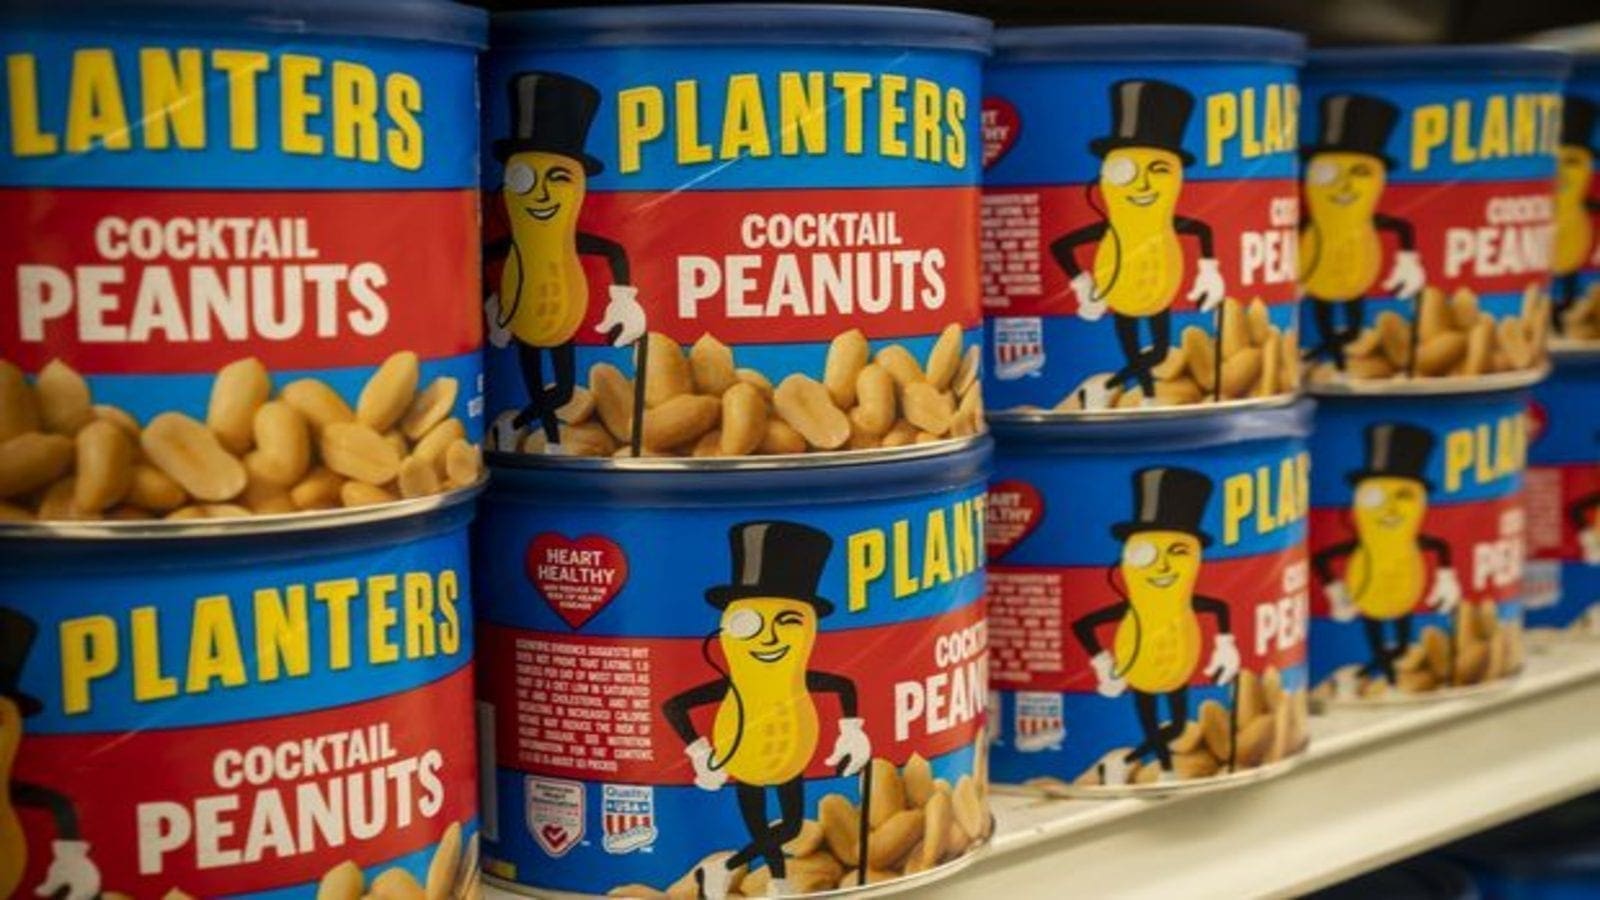 Kraft Heinz sells planters brand to Hormel Foods for US$3.35Bn to focus on core areas of focus